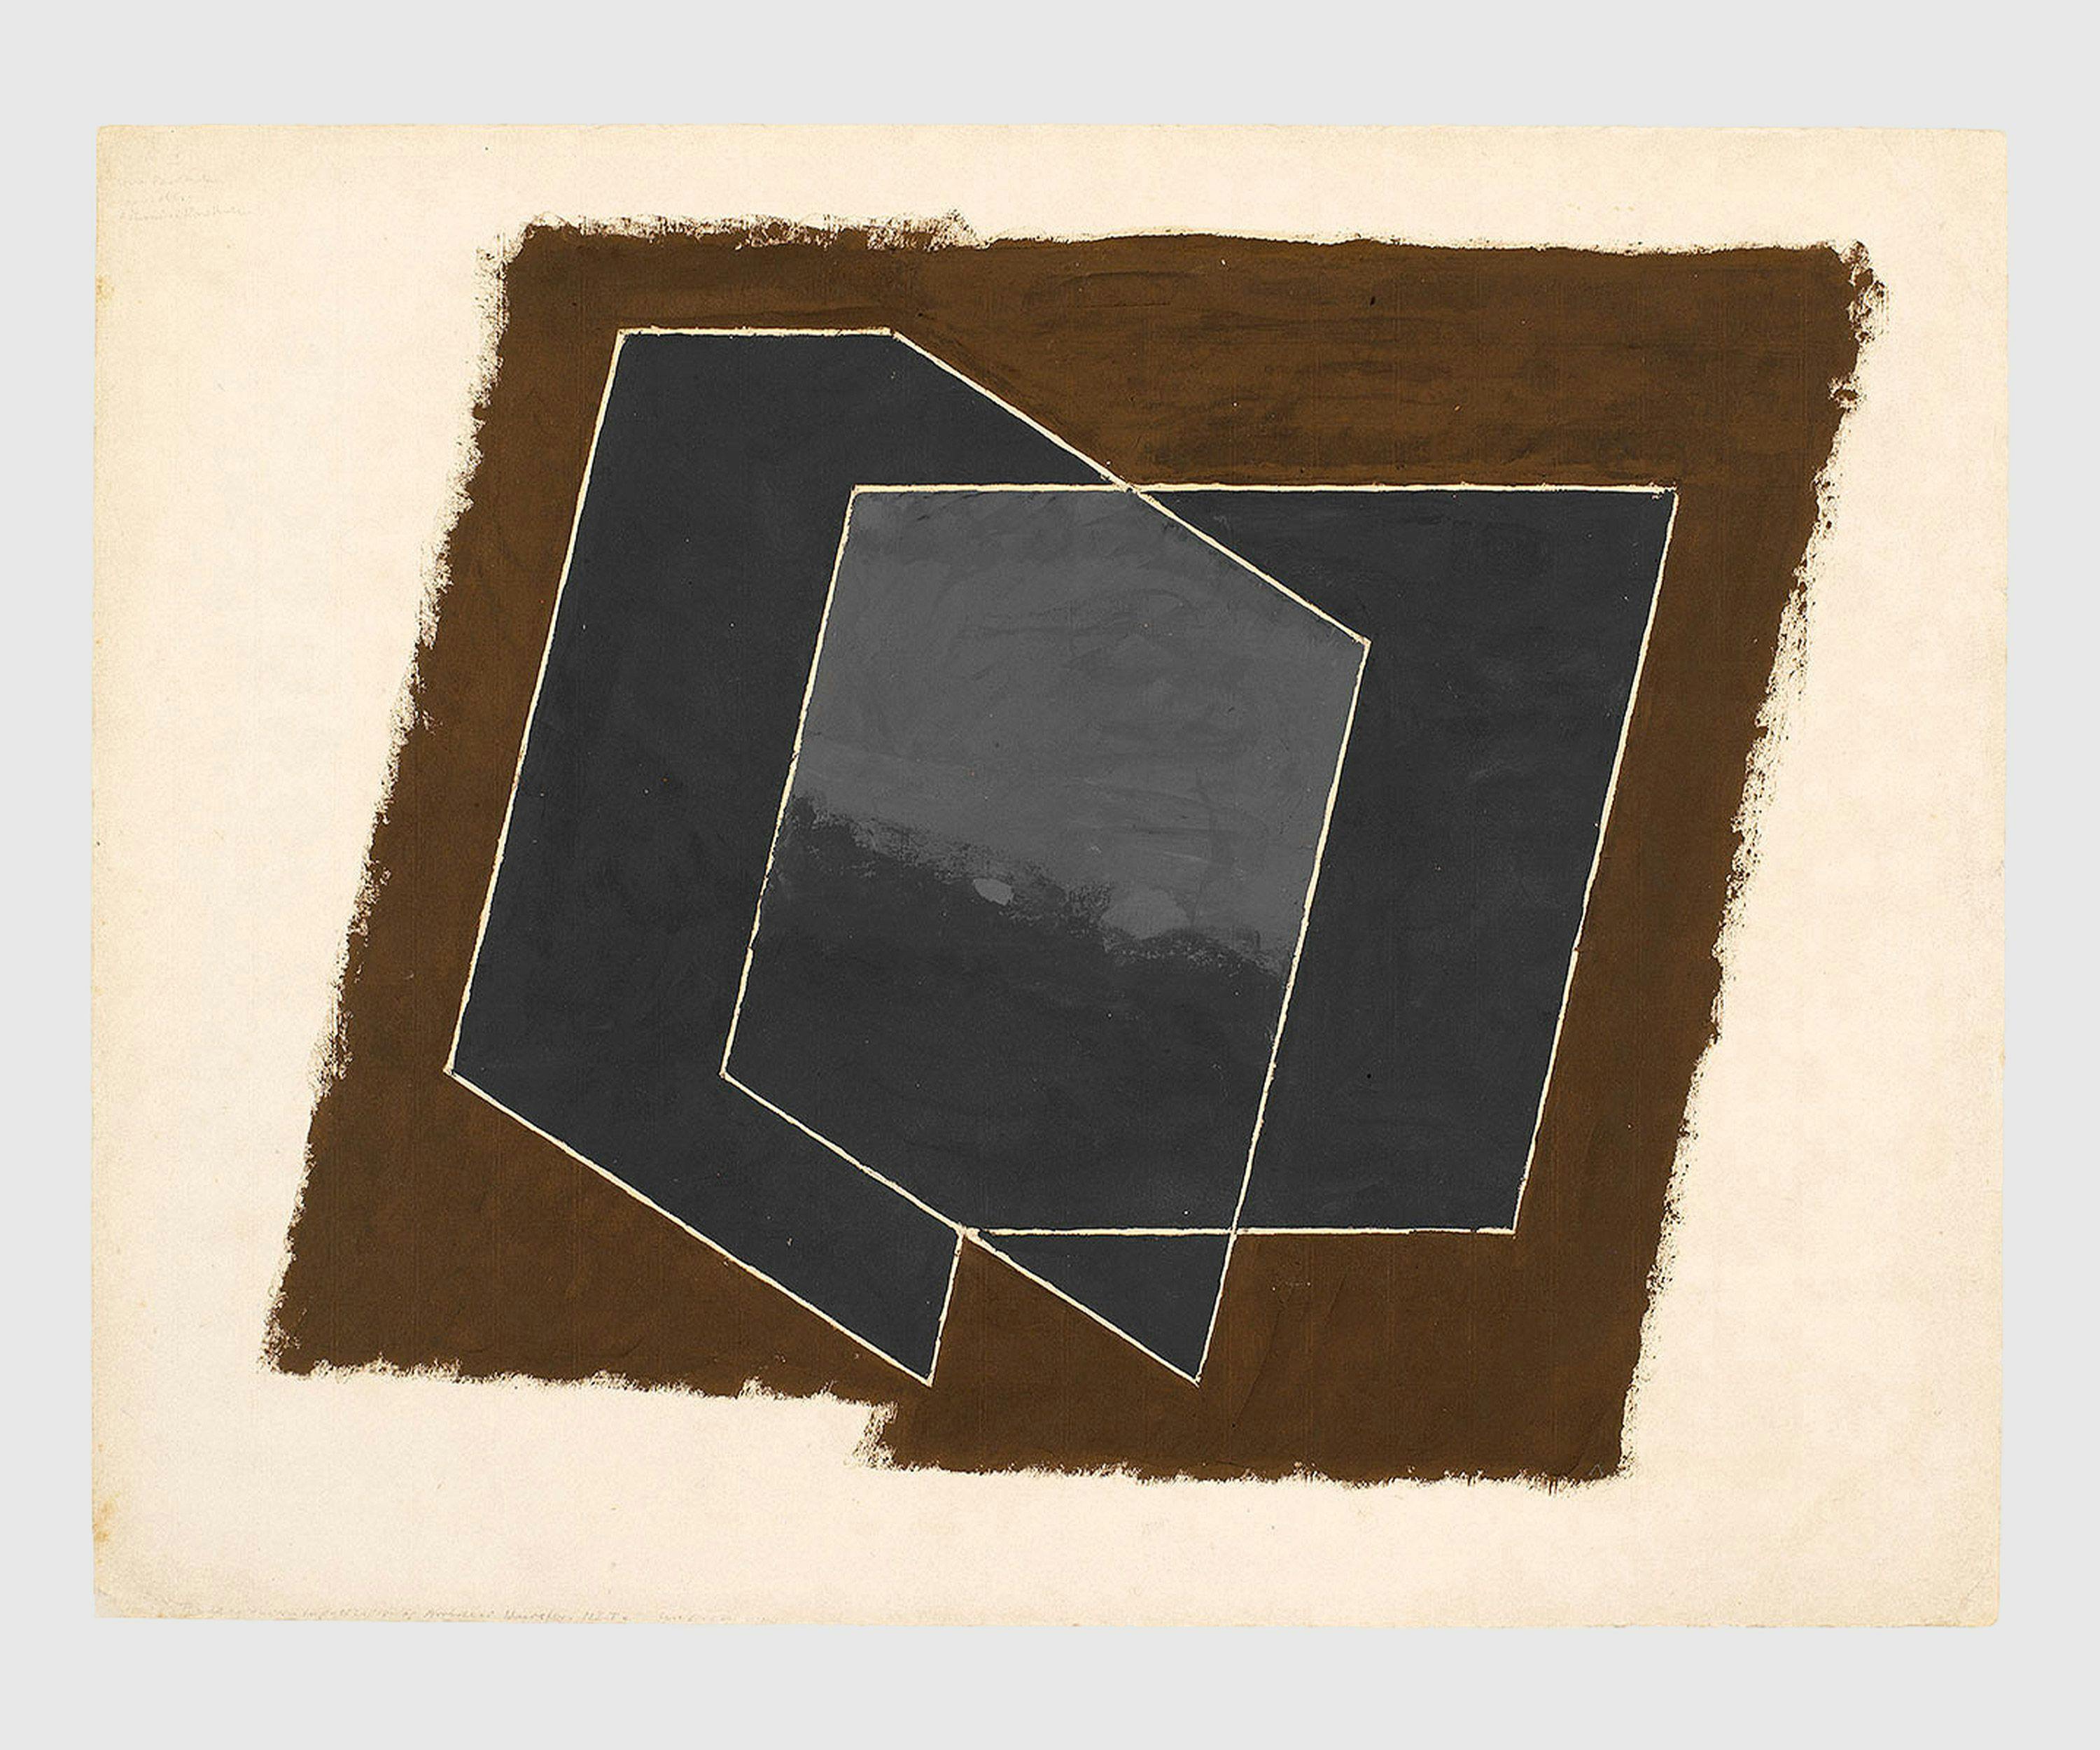 A painting by Josef Albers, titled Study for Penetrating Gray, dated 1942.